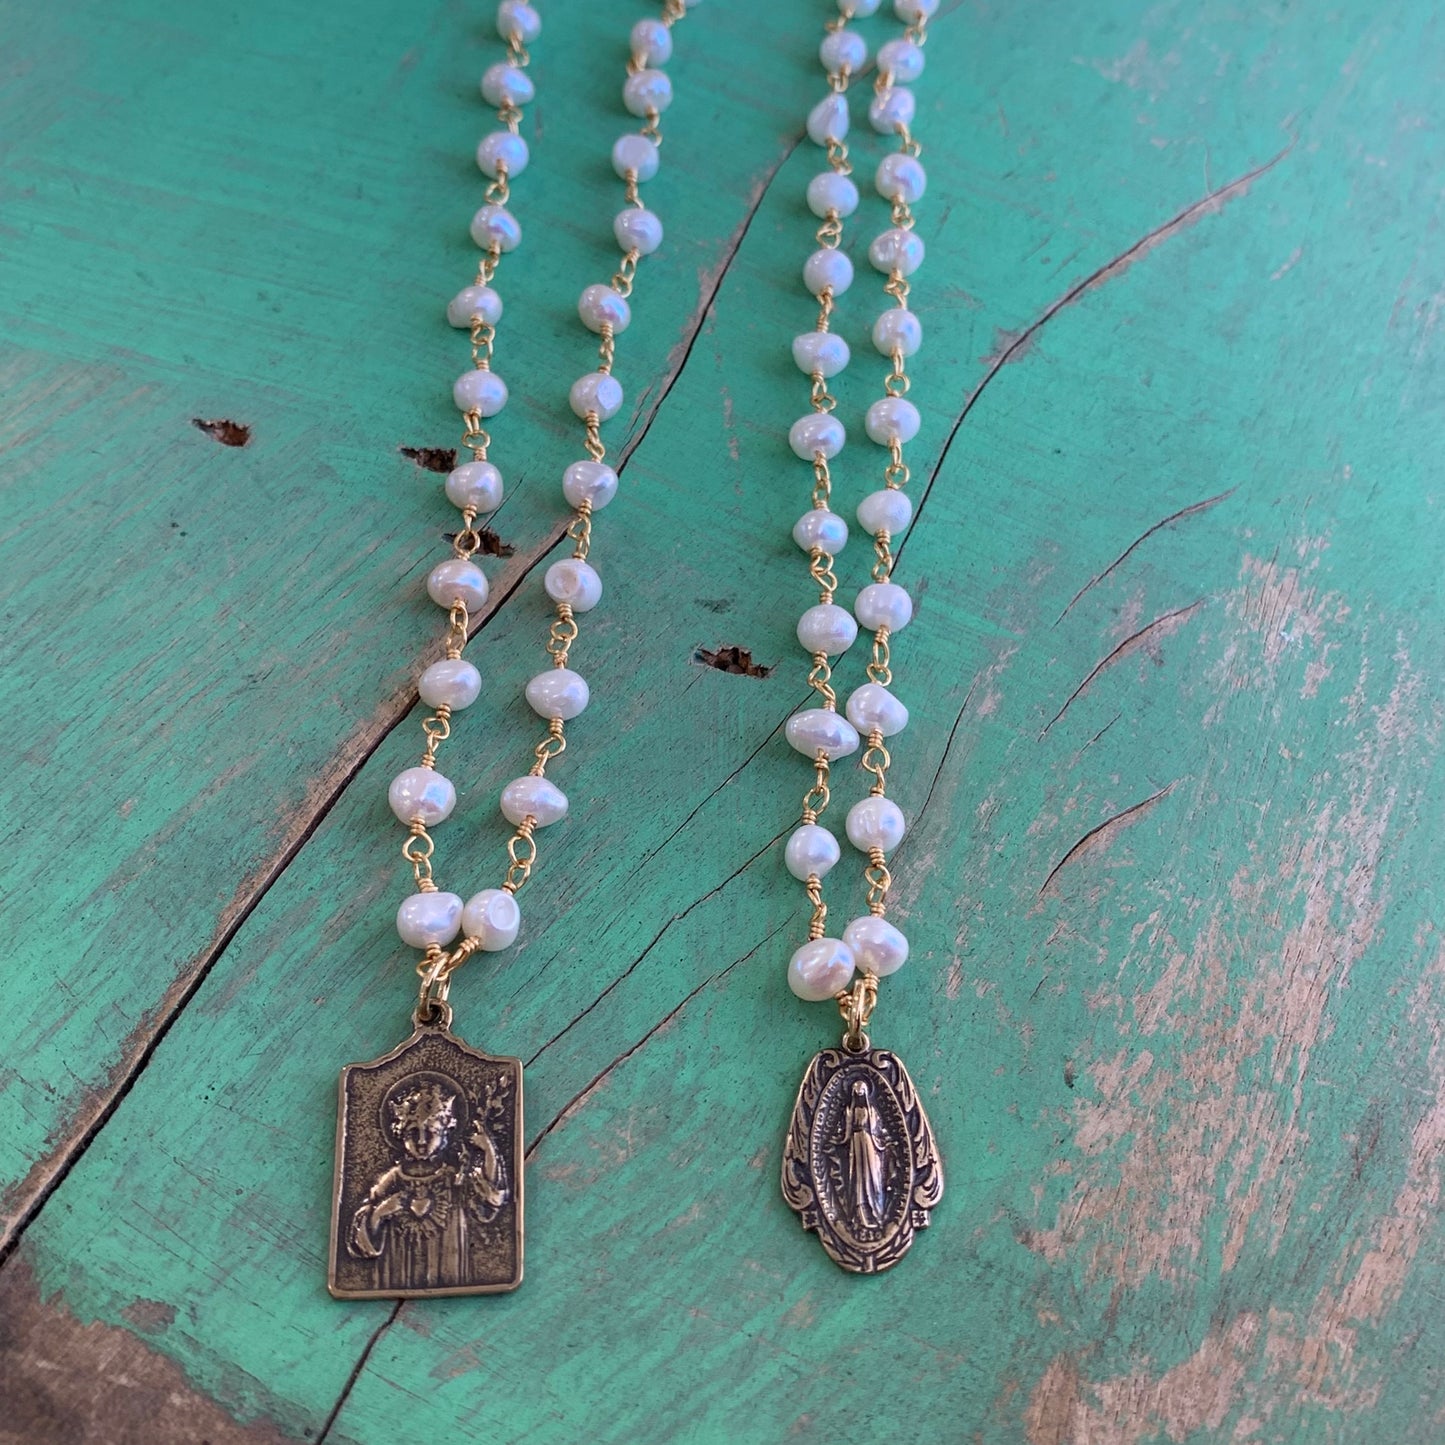 Pearls and Prayers Necklace